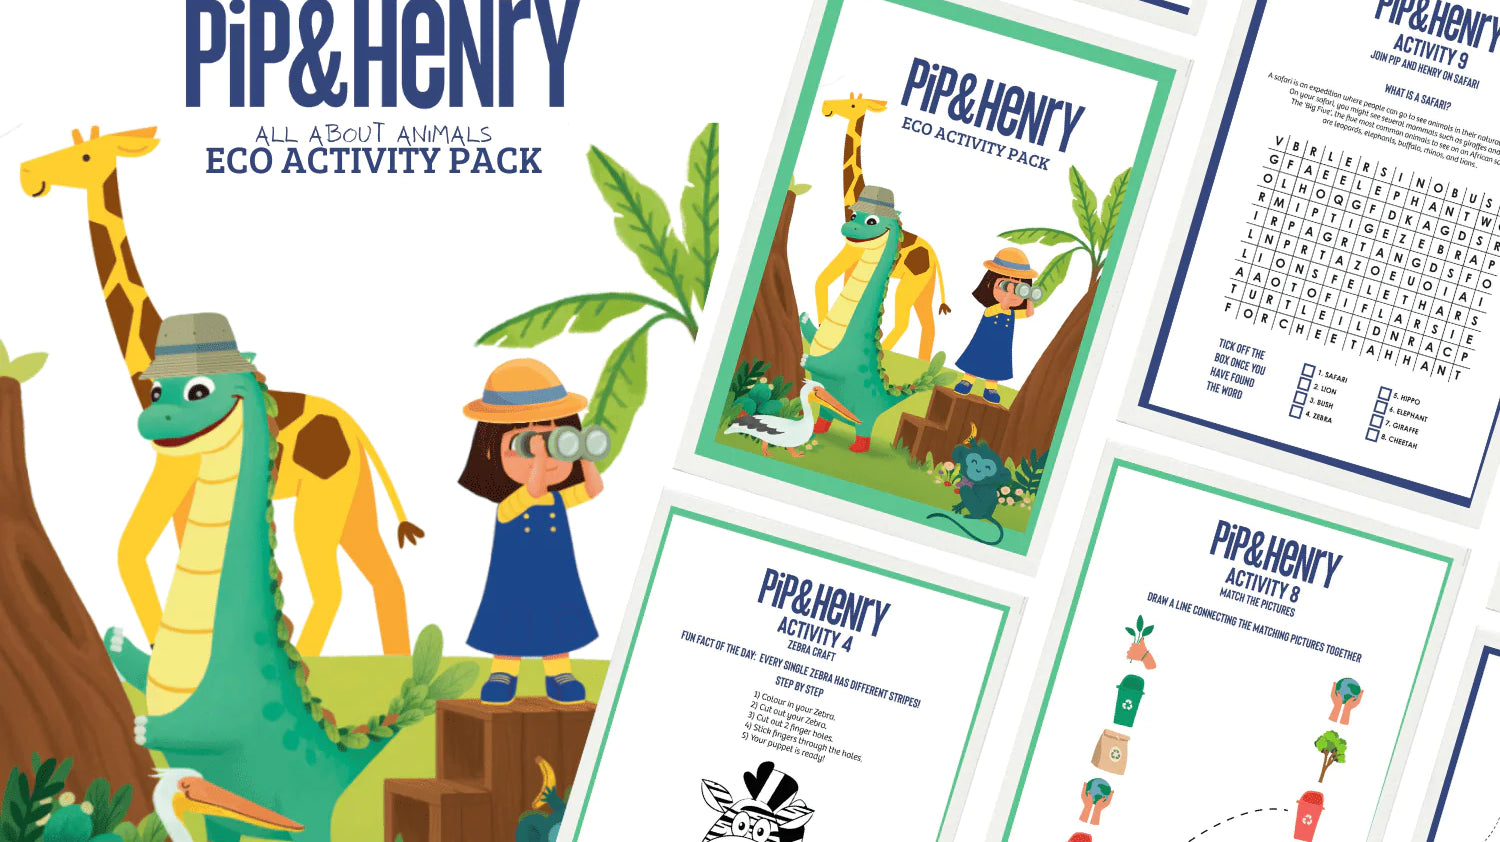 Your All About Animals Eco Activity Pack Is Here!